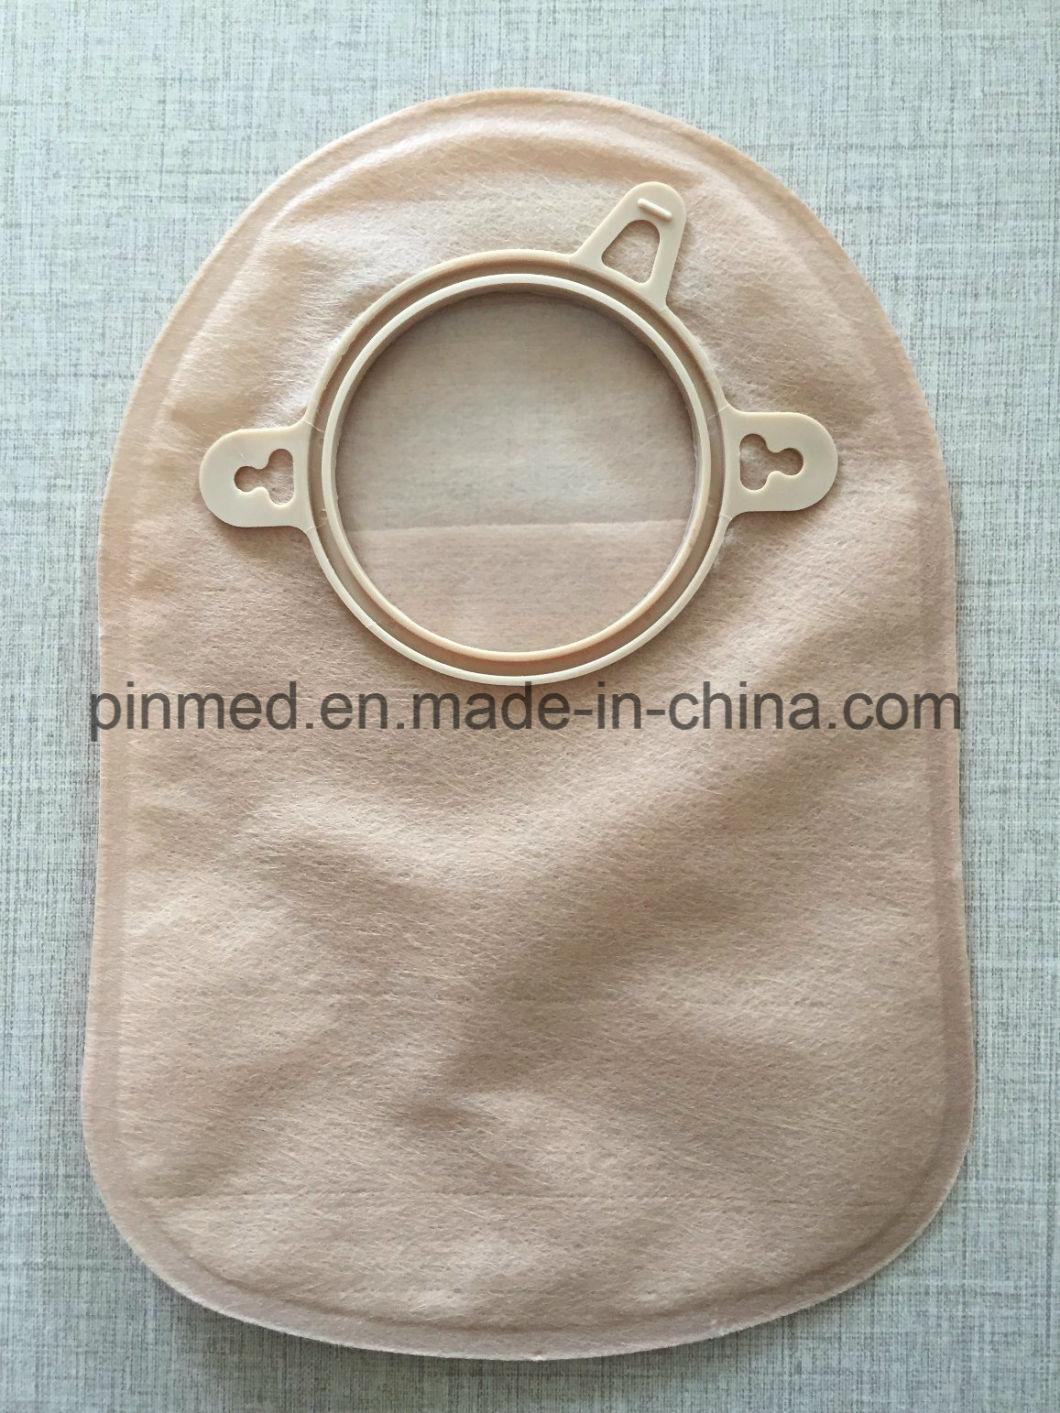 Disposable Two Piece Urostomy Bags